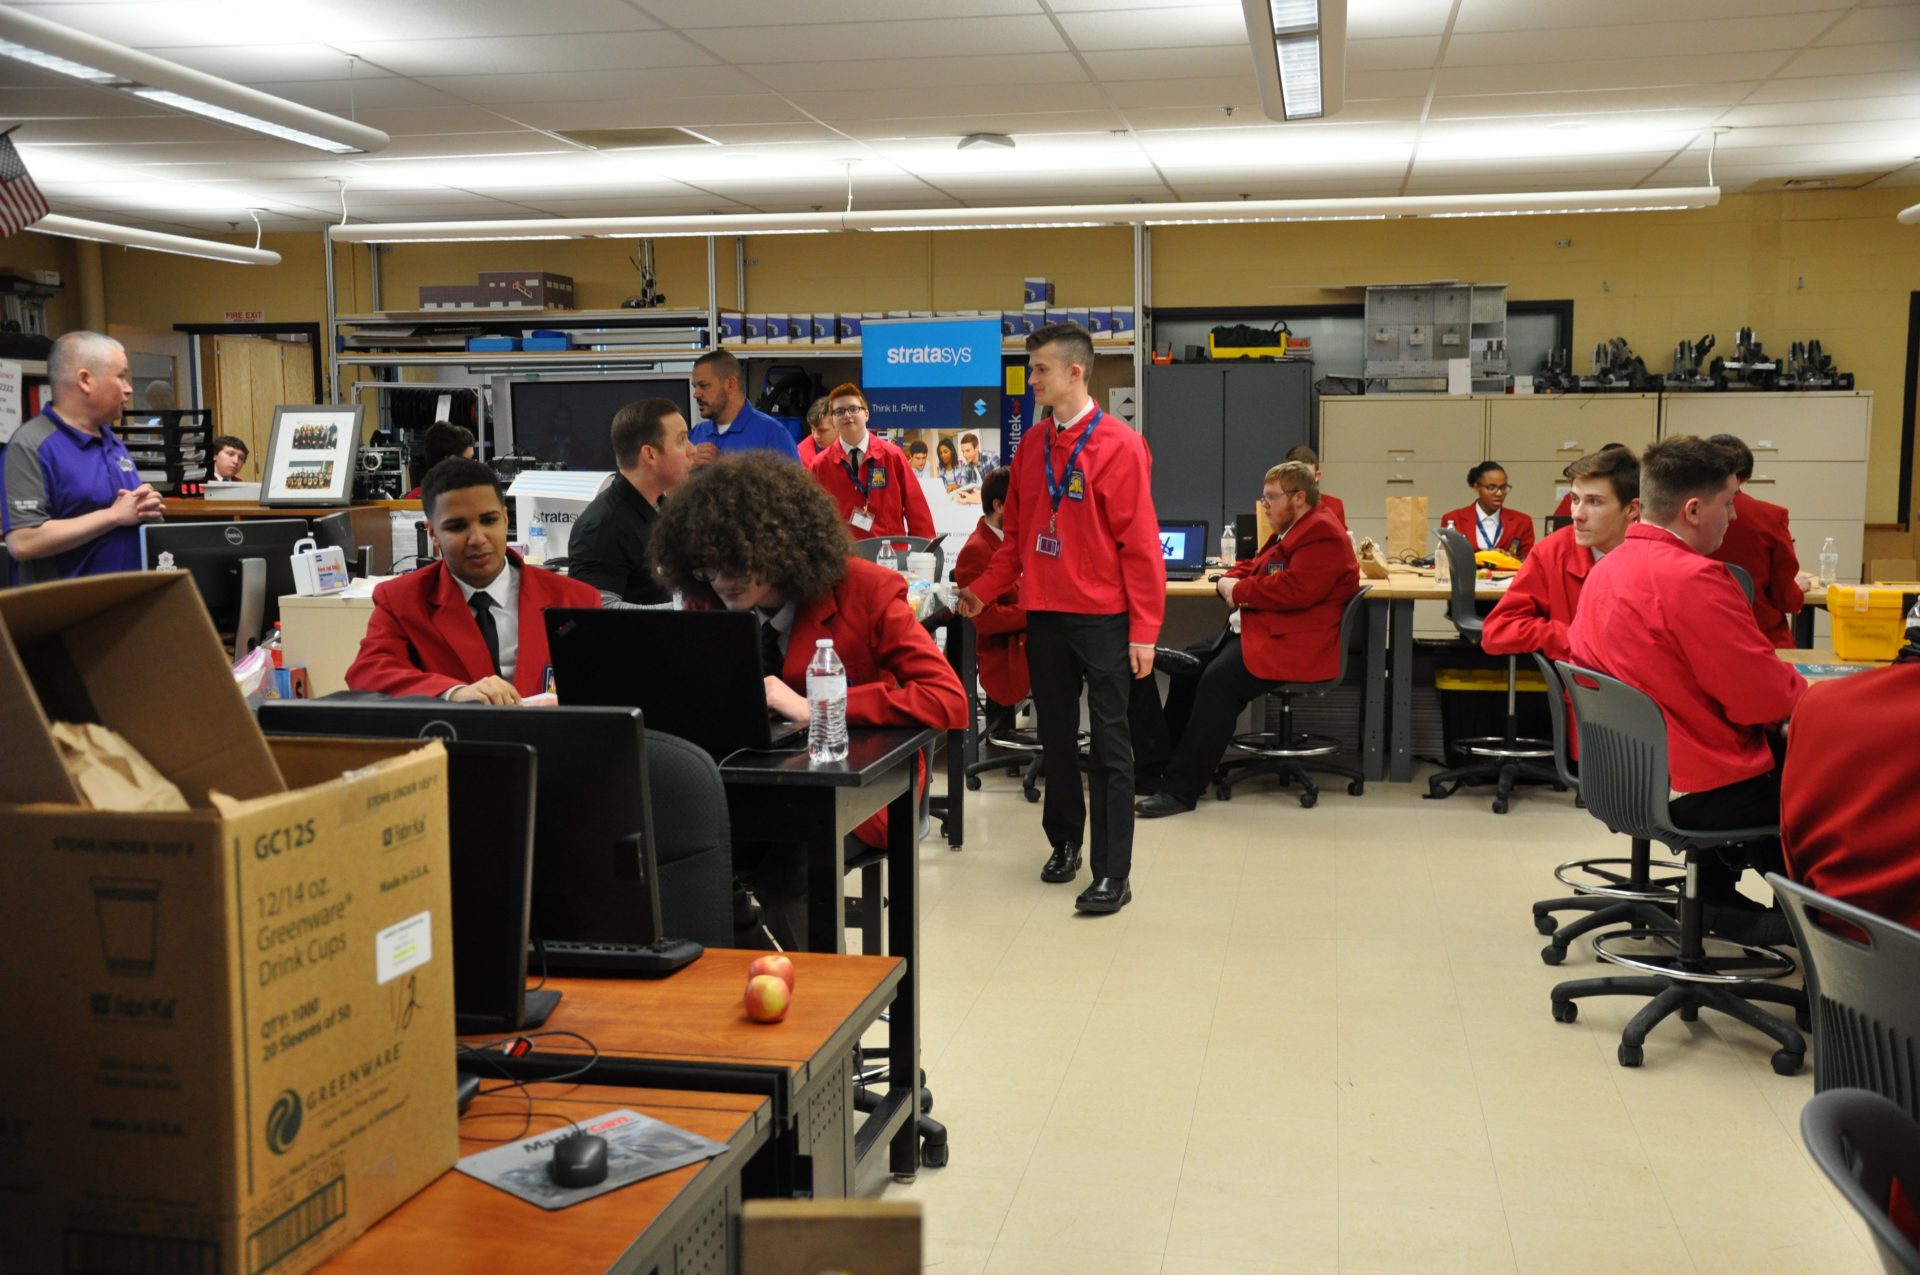 SkillsUSA students working together on computers